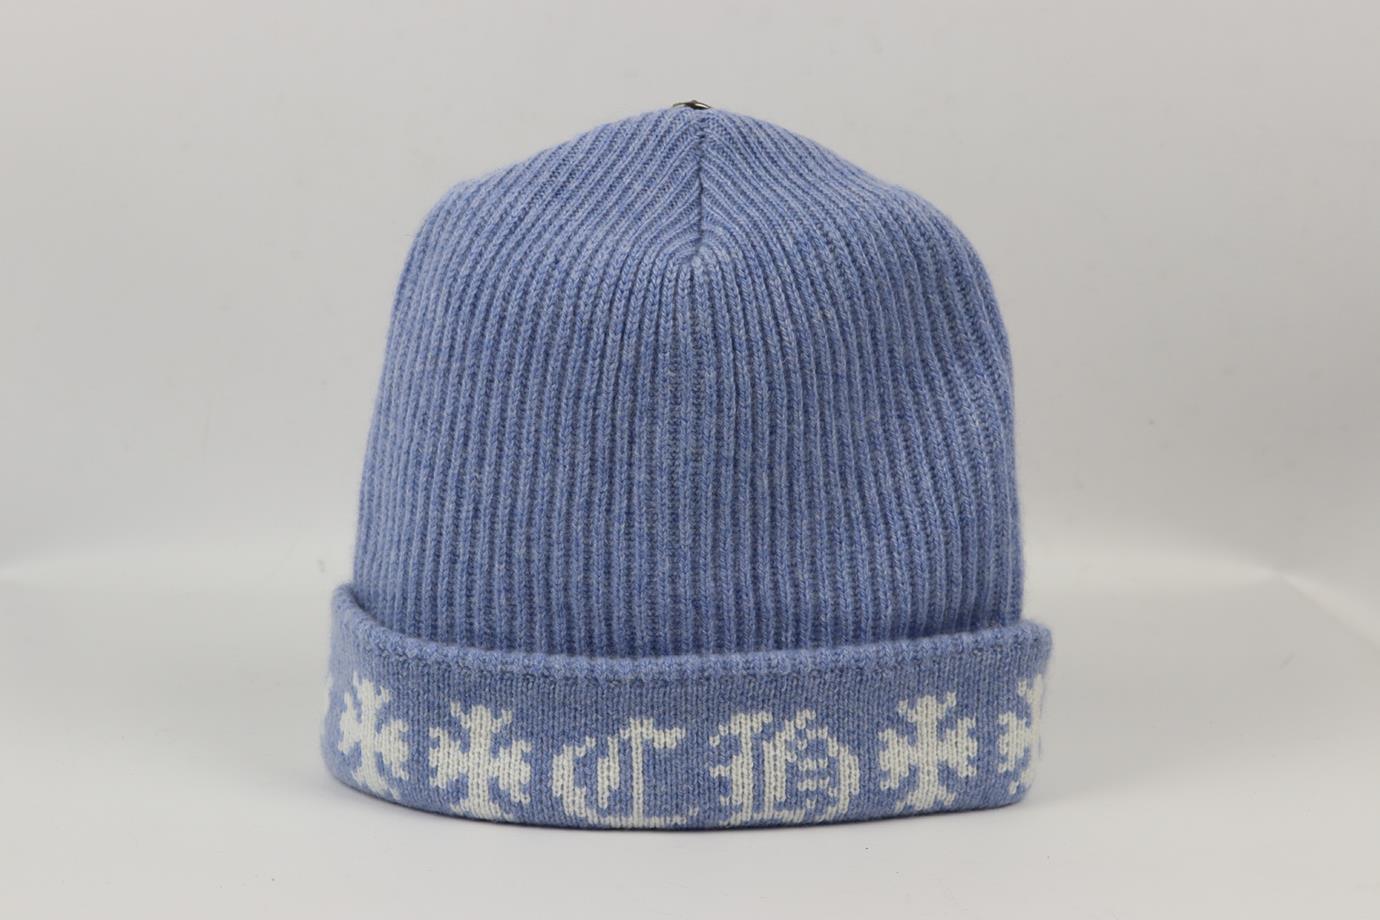 Chrome Hearts intarsia ribbed cashmere beanie. Blue and white. Pull on. 100% cashmere. Does not come with dustbag or box. Size: One Size. Length: 11 in. Circumference: 22 in. Very good condition - Worn once. No sign of wear; see pictures